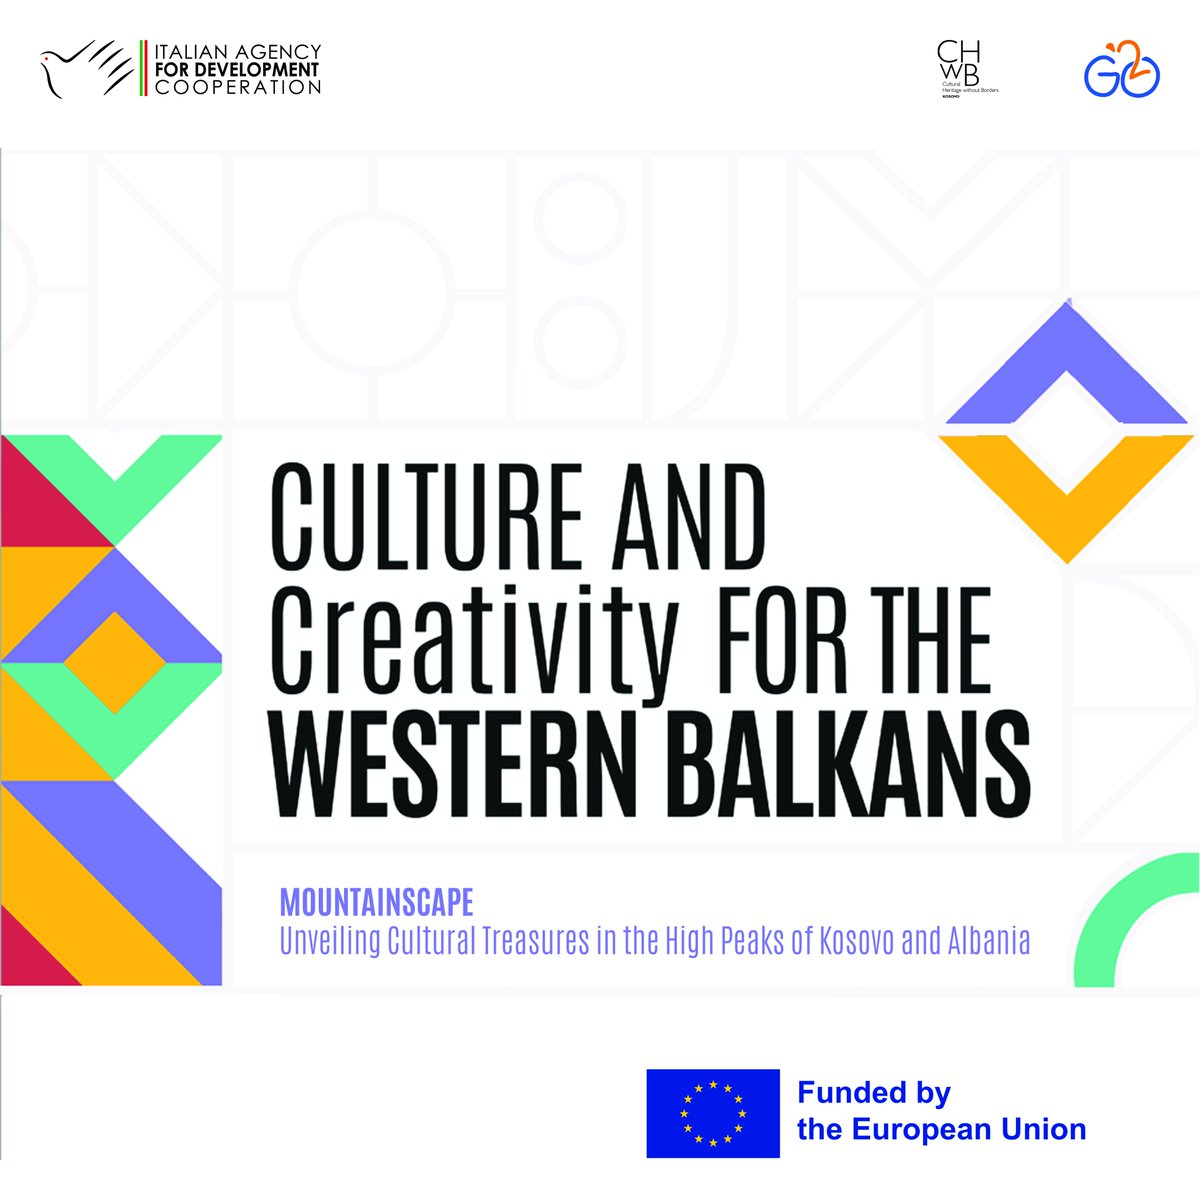 This initiative is supported by AICSTirana   in the framework of @cc4wbs , a project funded by the #EuropeanUnion  that aims to foster dialogue in the #WesternBalkans by enhancing the cultural and creative sectors for increased socio-economic impact.
@aics_it
@EUinAlbania